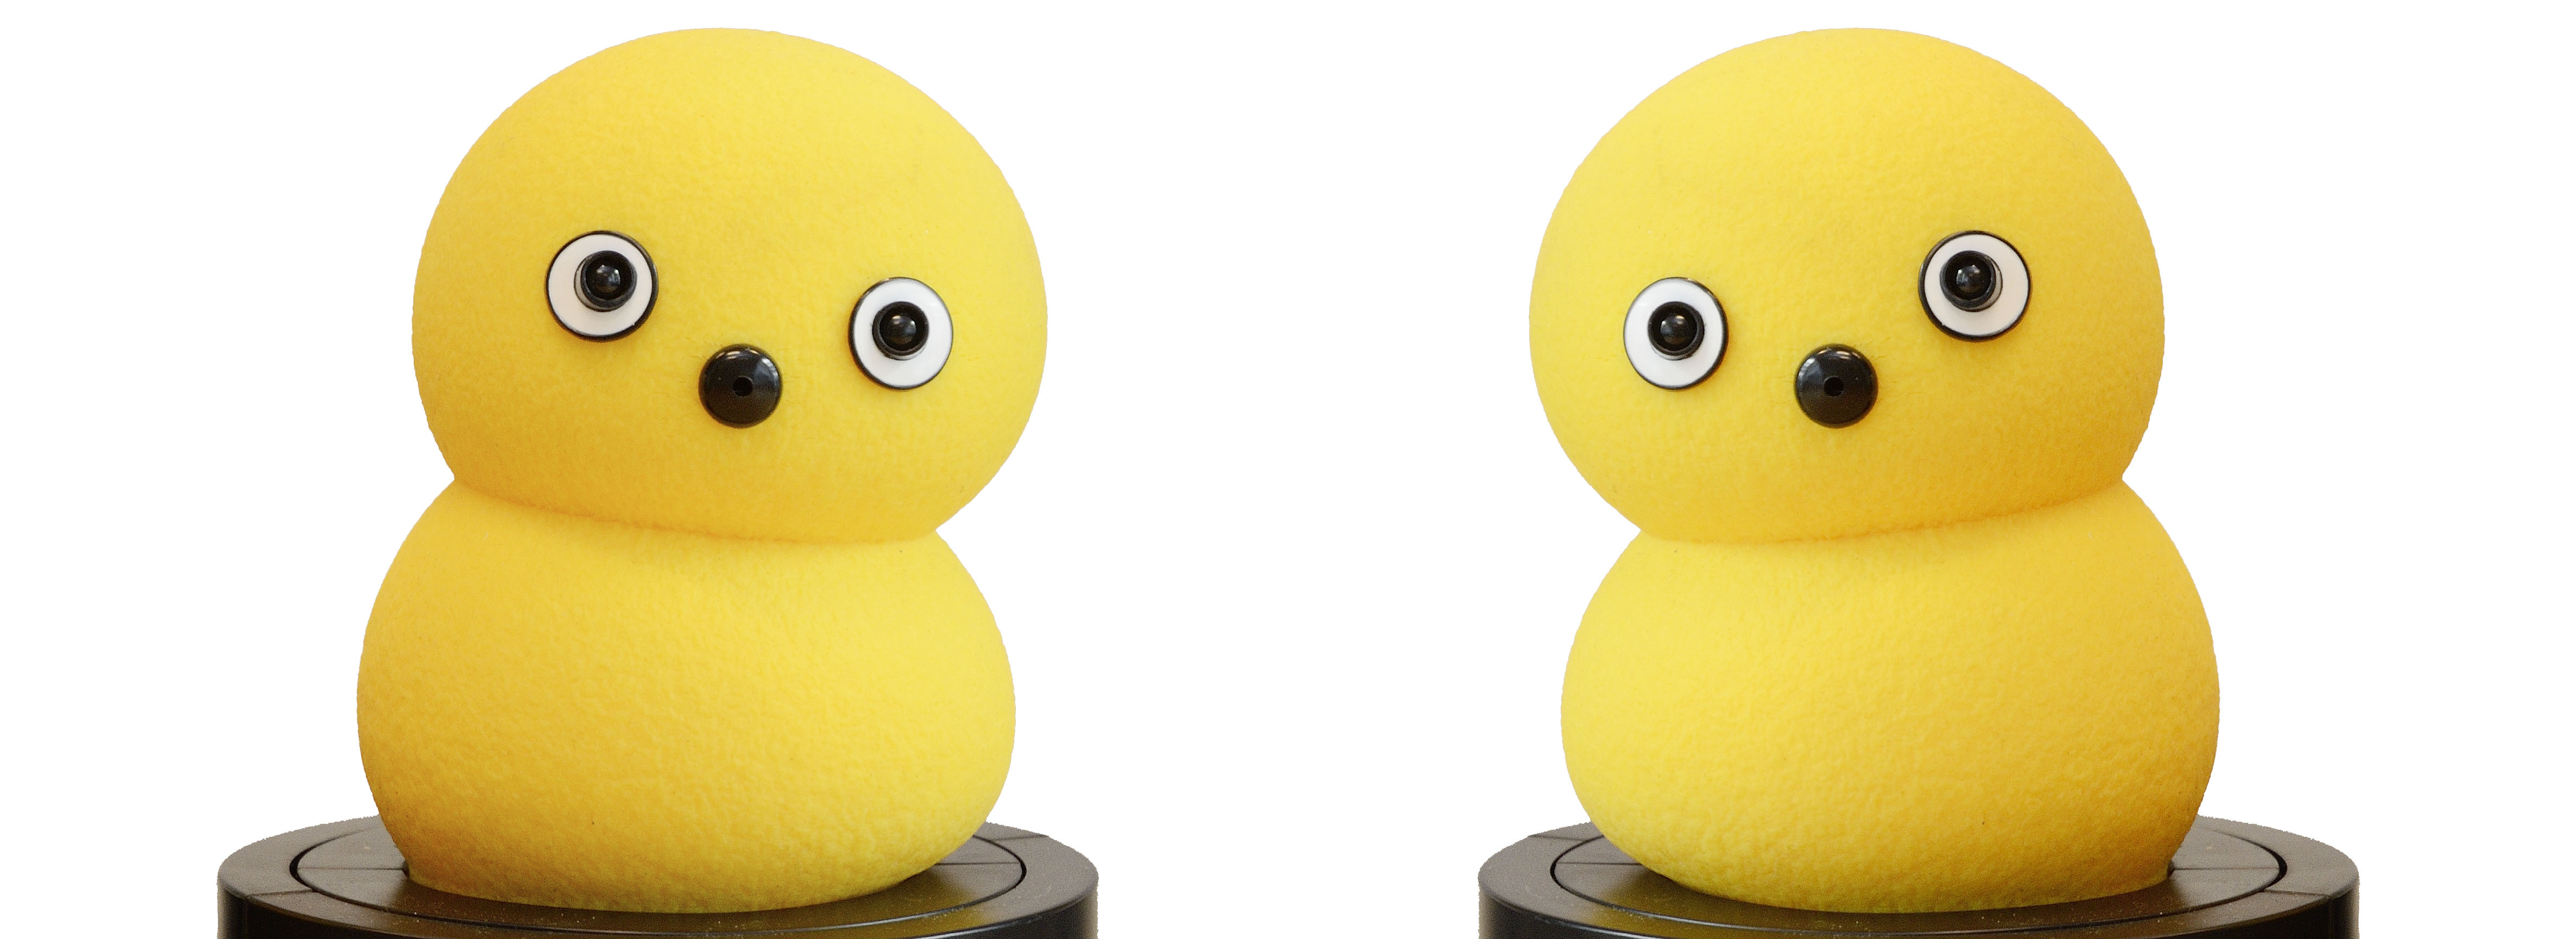 Two Keepon Robots